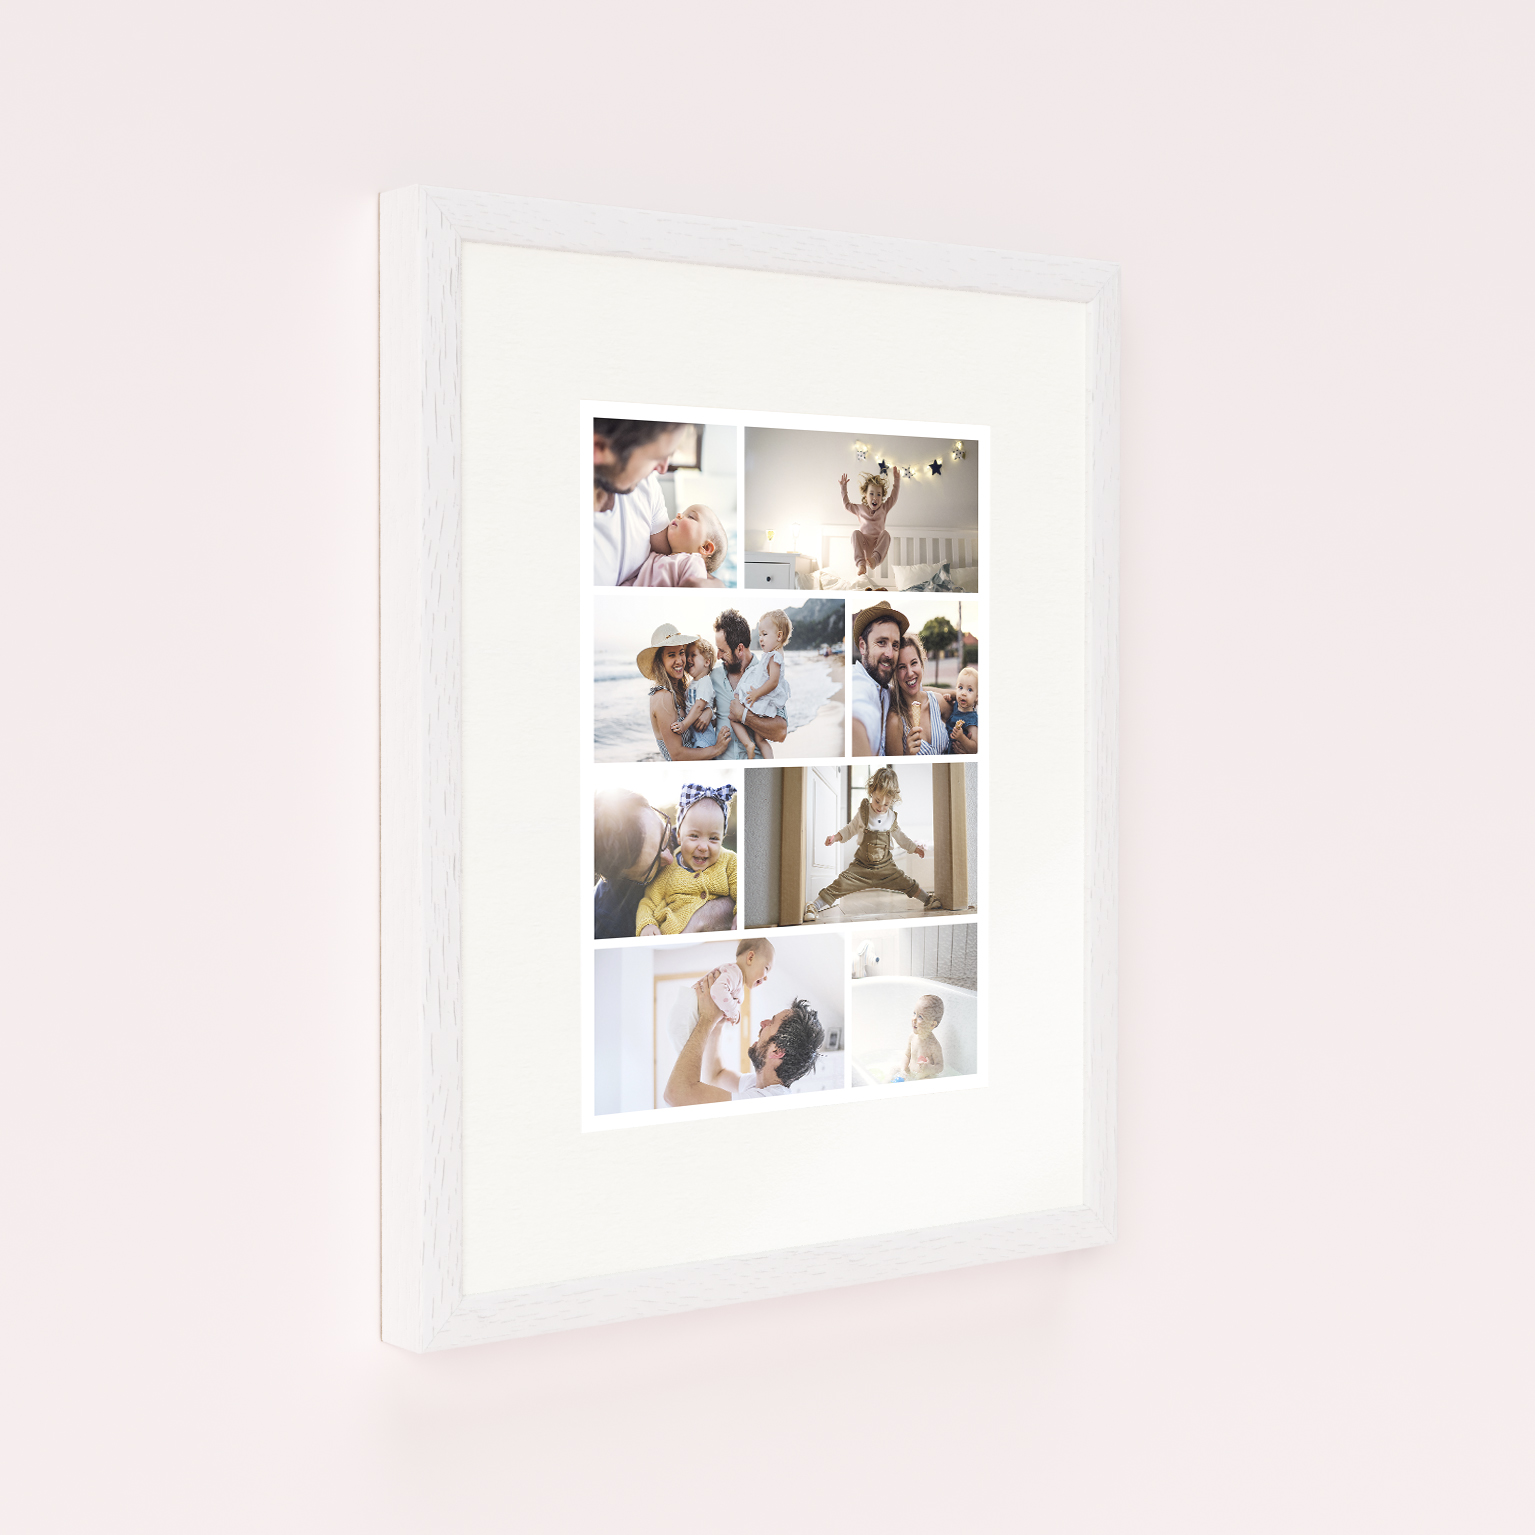 Photo of a framed photo print called 'Playful Memories'. It is 40cm x 30cm in size, in a Portrait orientation. It has space for 8 photos.